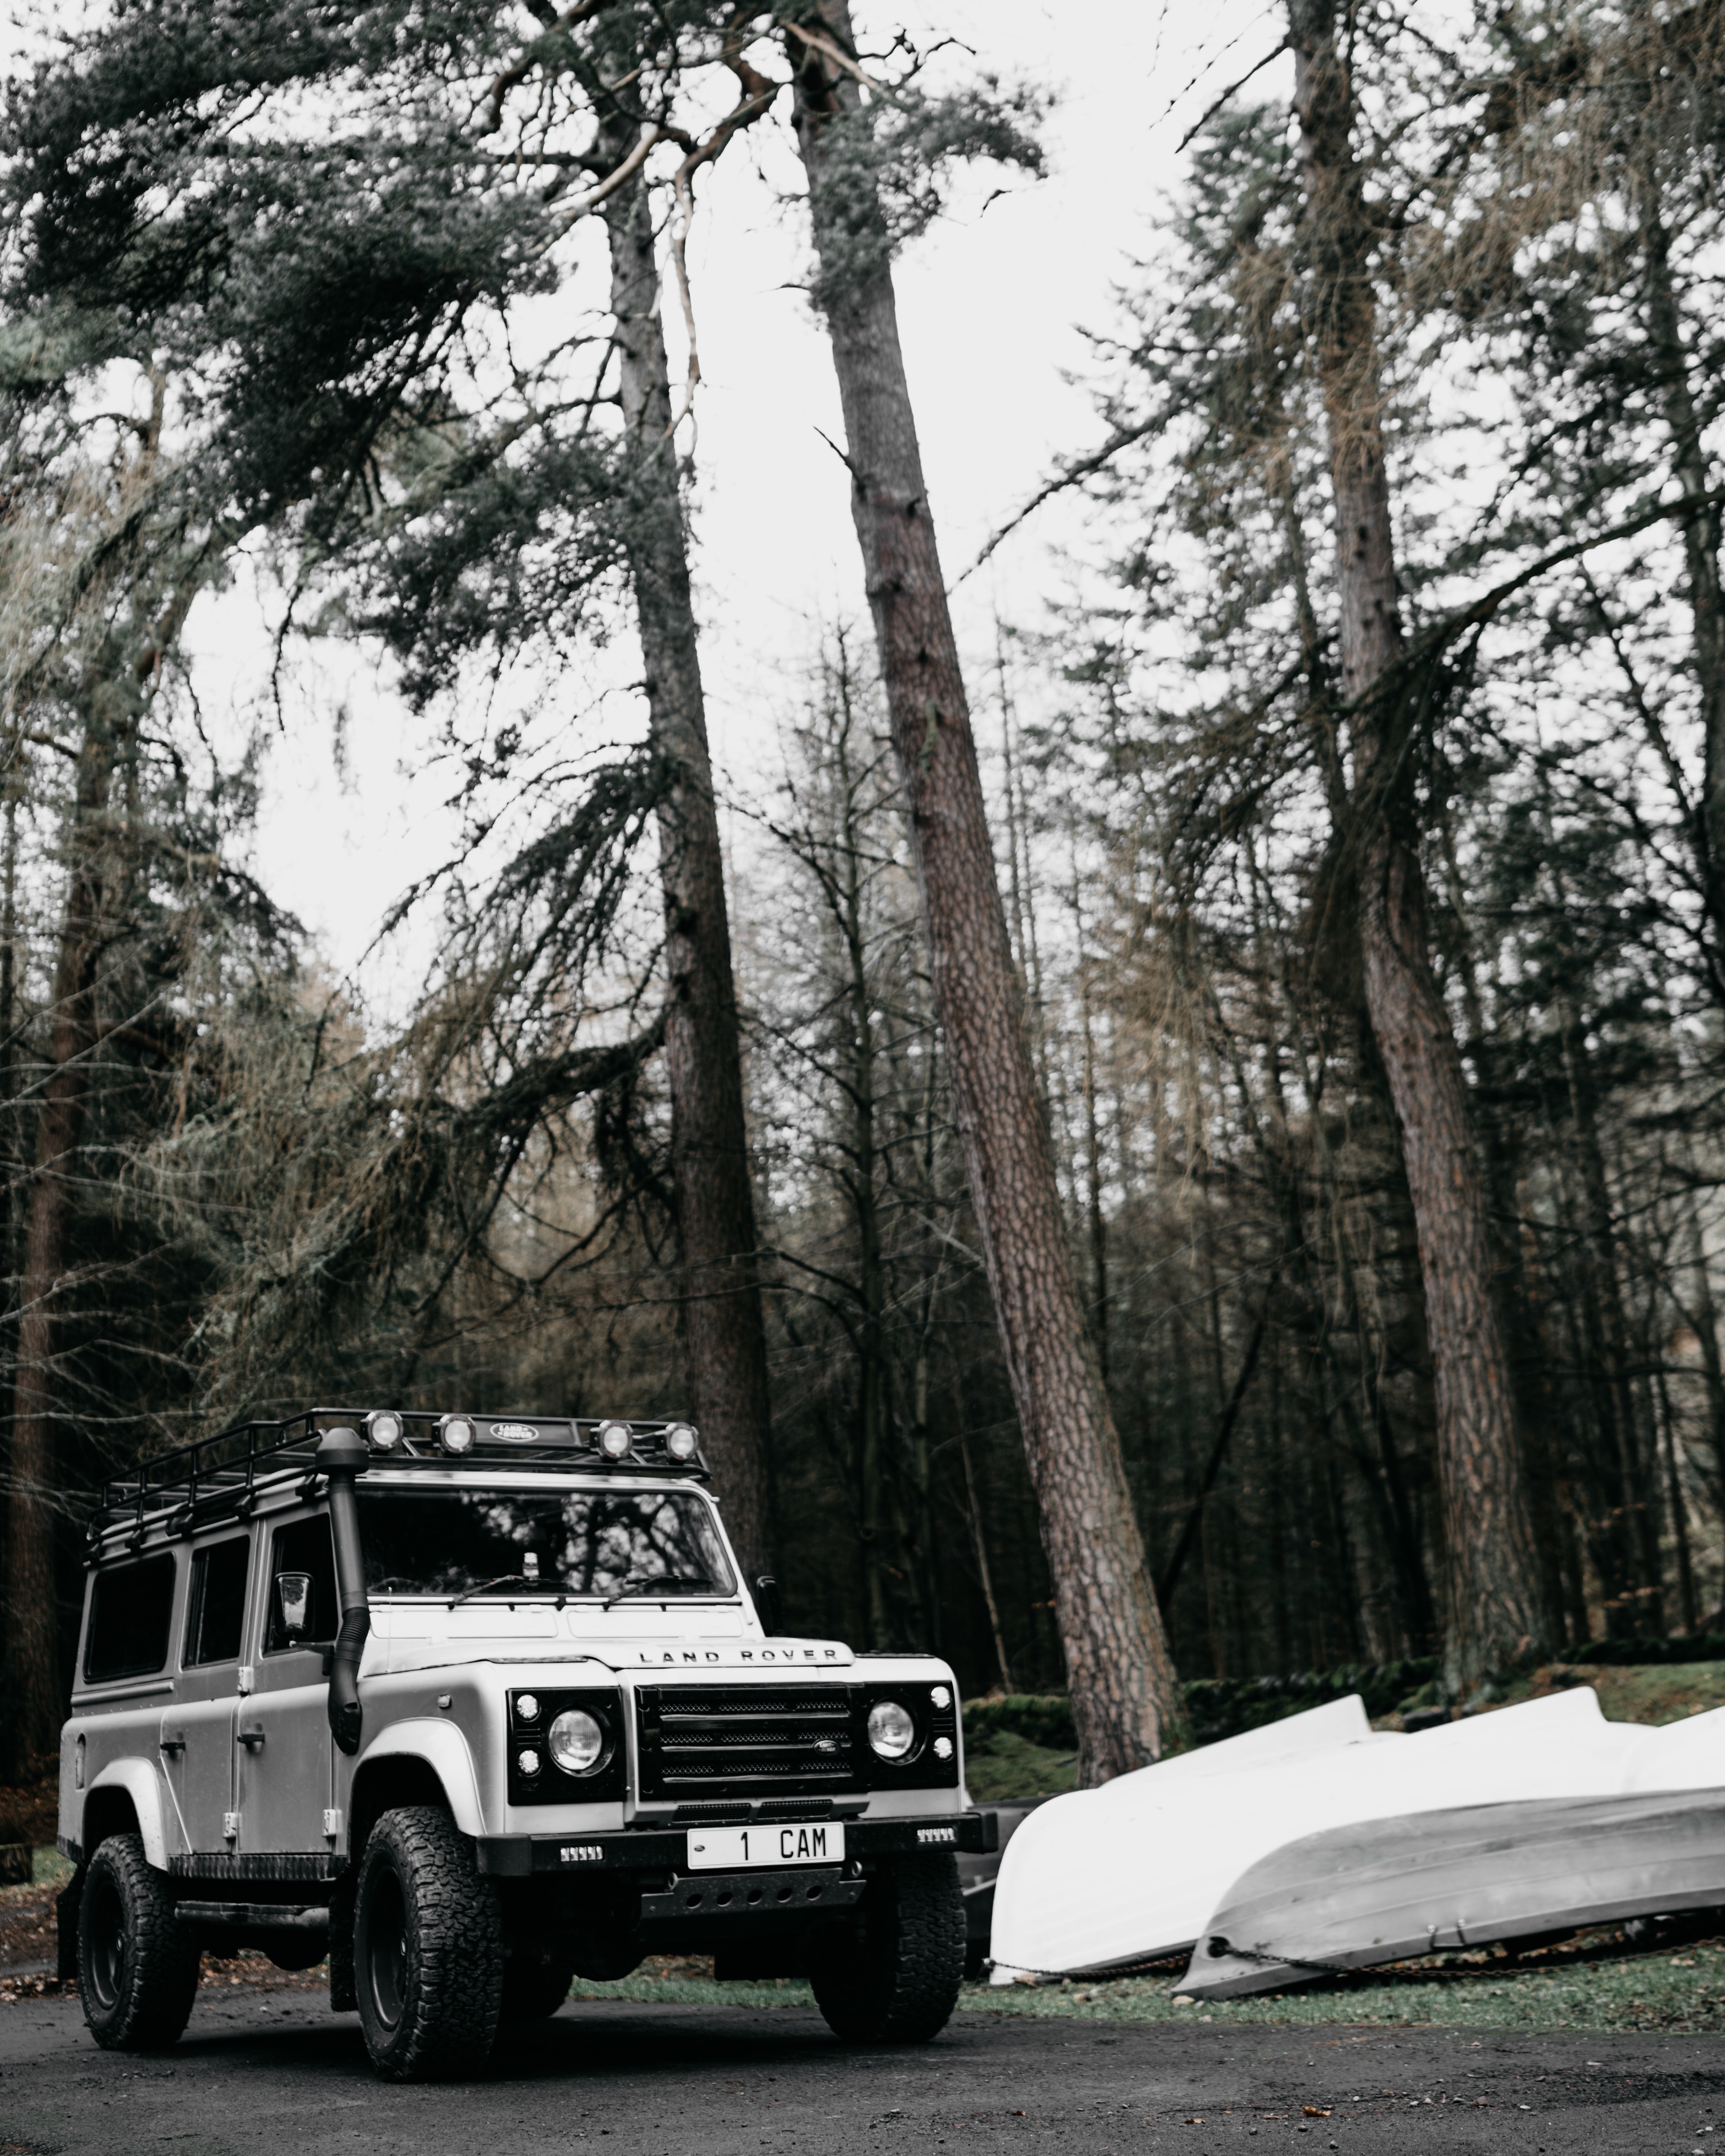 1080p Land Rover Defender Hd Images